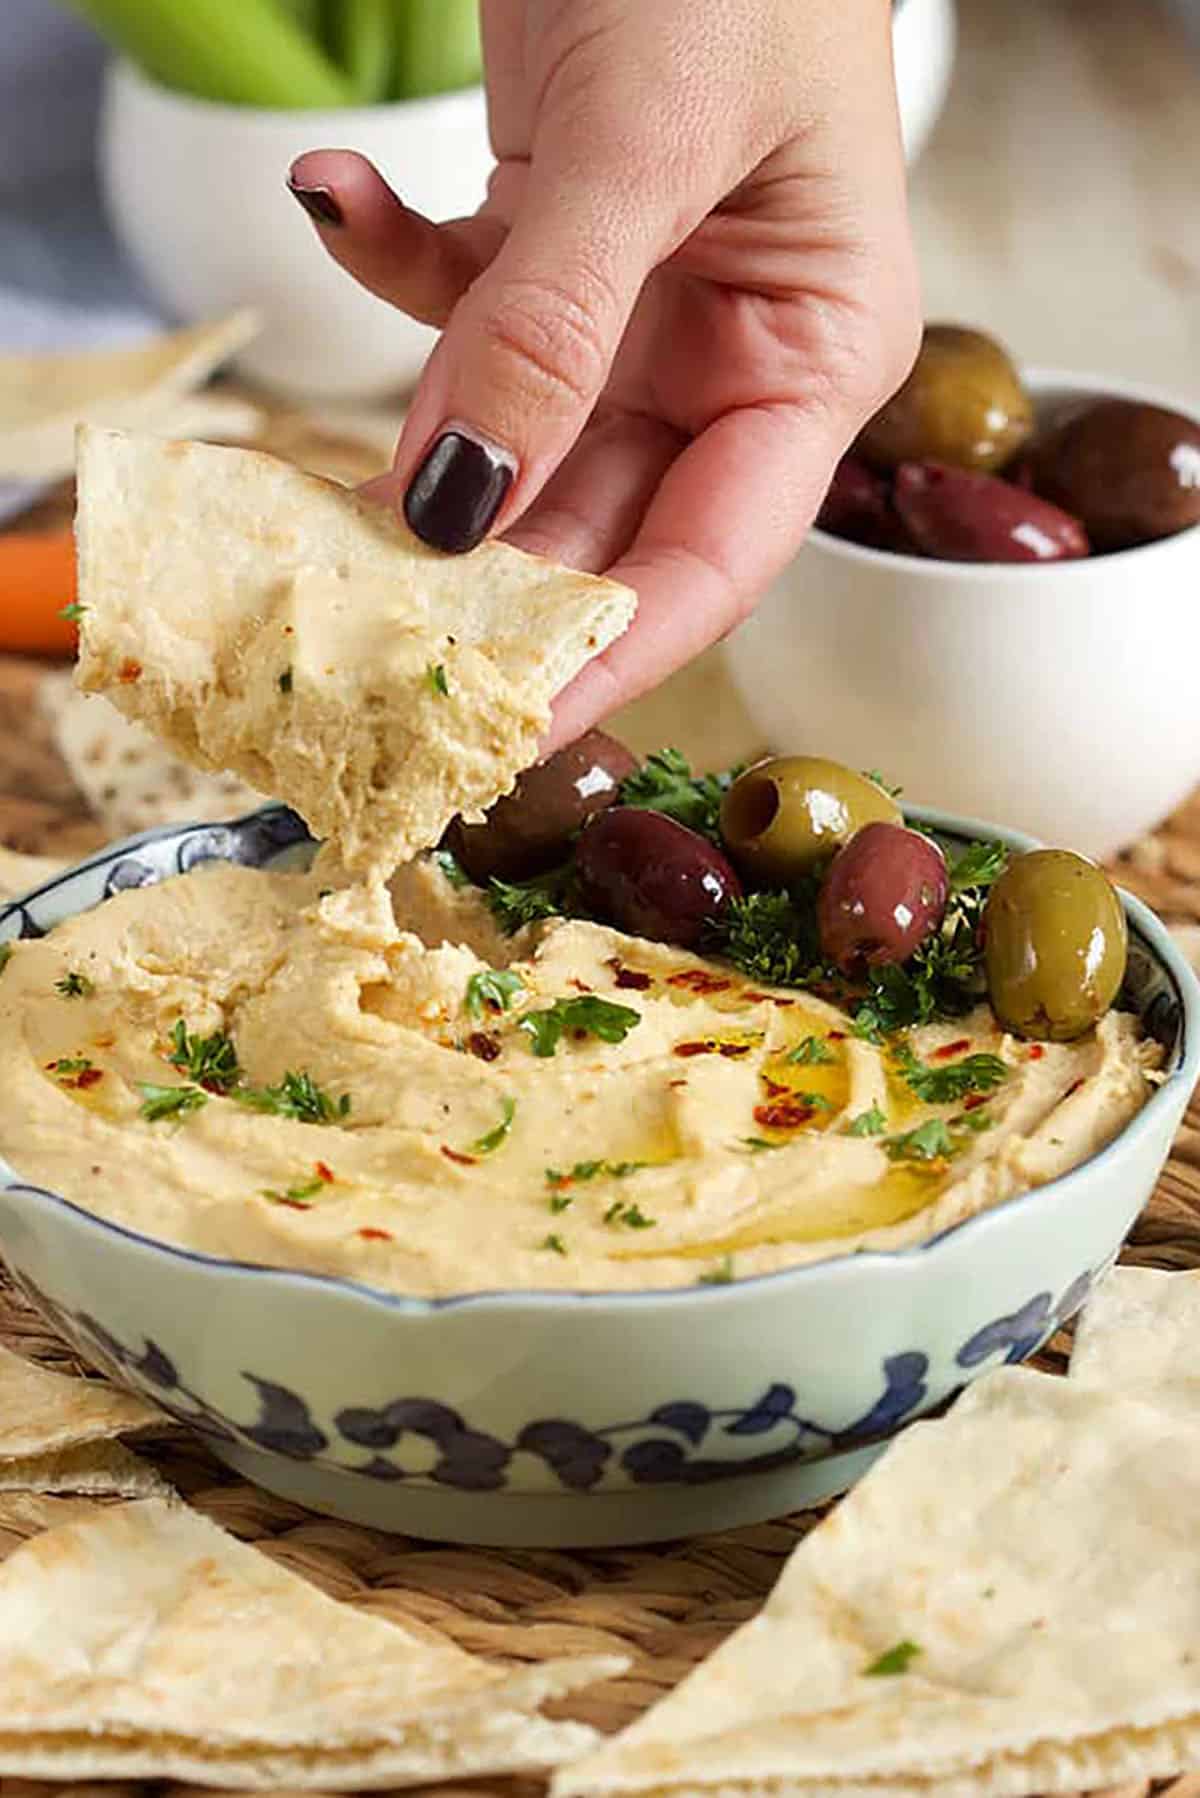 Hummus in a bowl with a hand dipping a pita wedge into it.